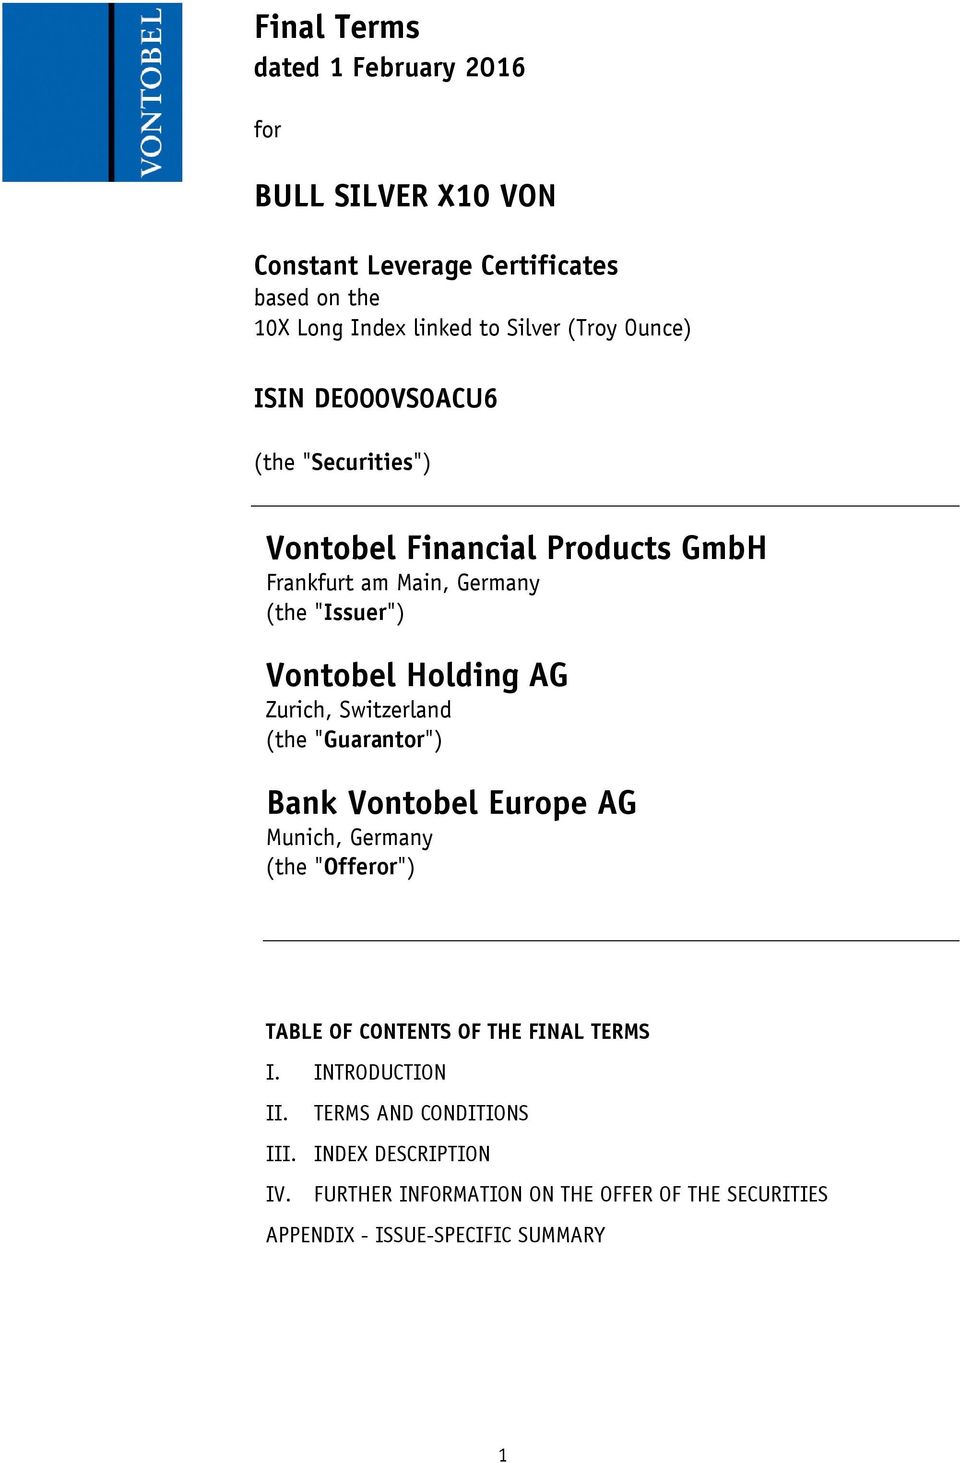 Zurich, Switzerland (the "Guarantor") Bank Vontobel Europe AG Munich, Germany (the "Offeror") TABLE OF CONTENTS OF THE FINAL TERMS I.